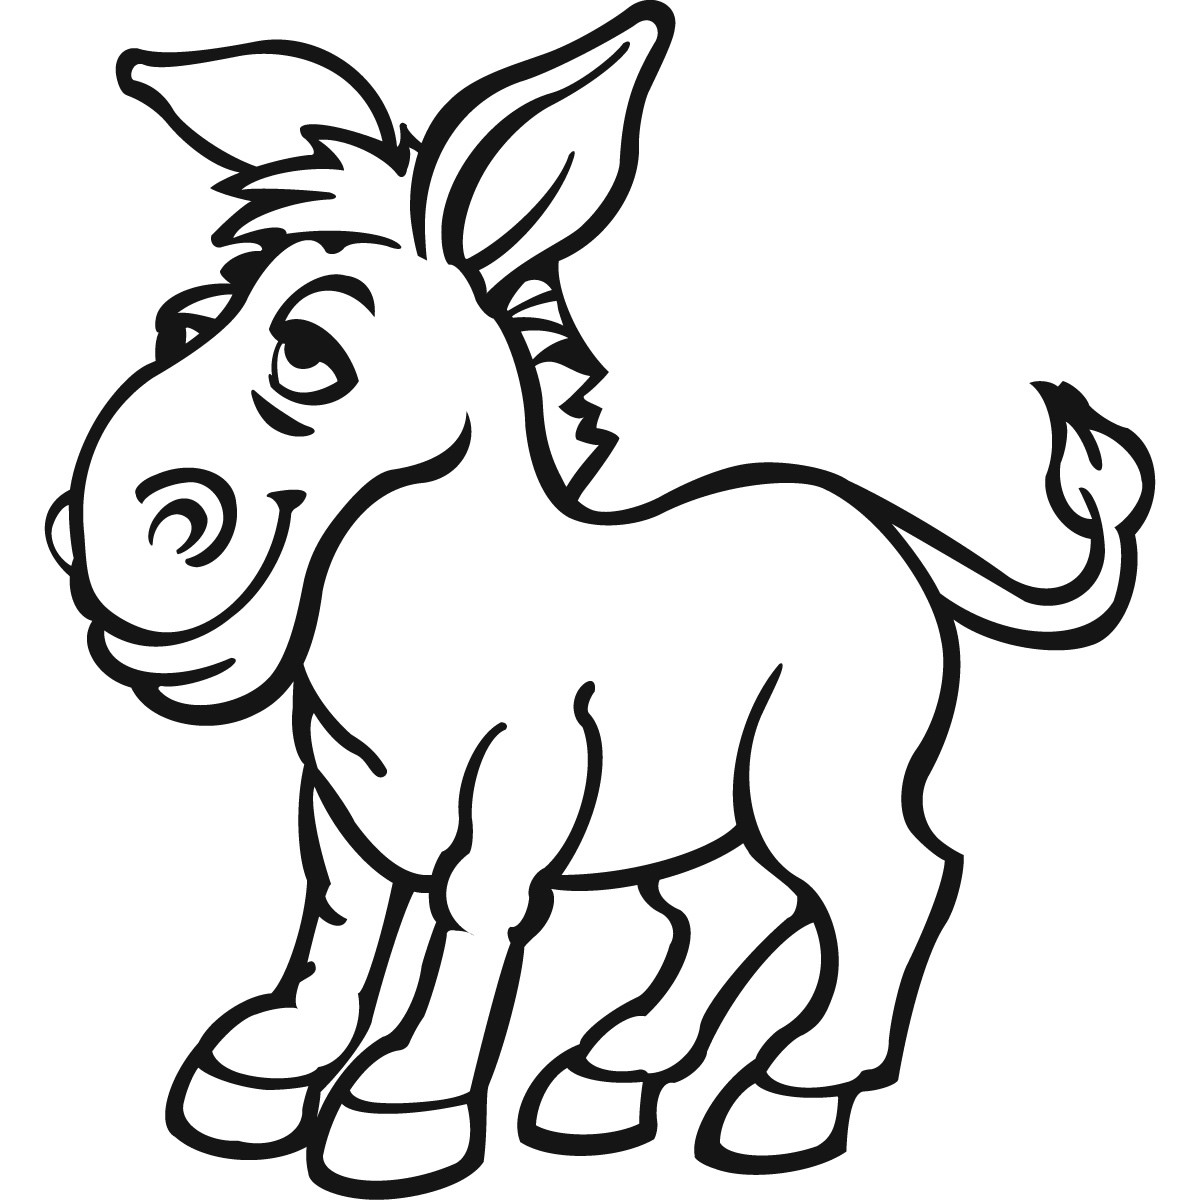 Donkey clipart draw cartoon. Drawing at paintingvalley com